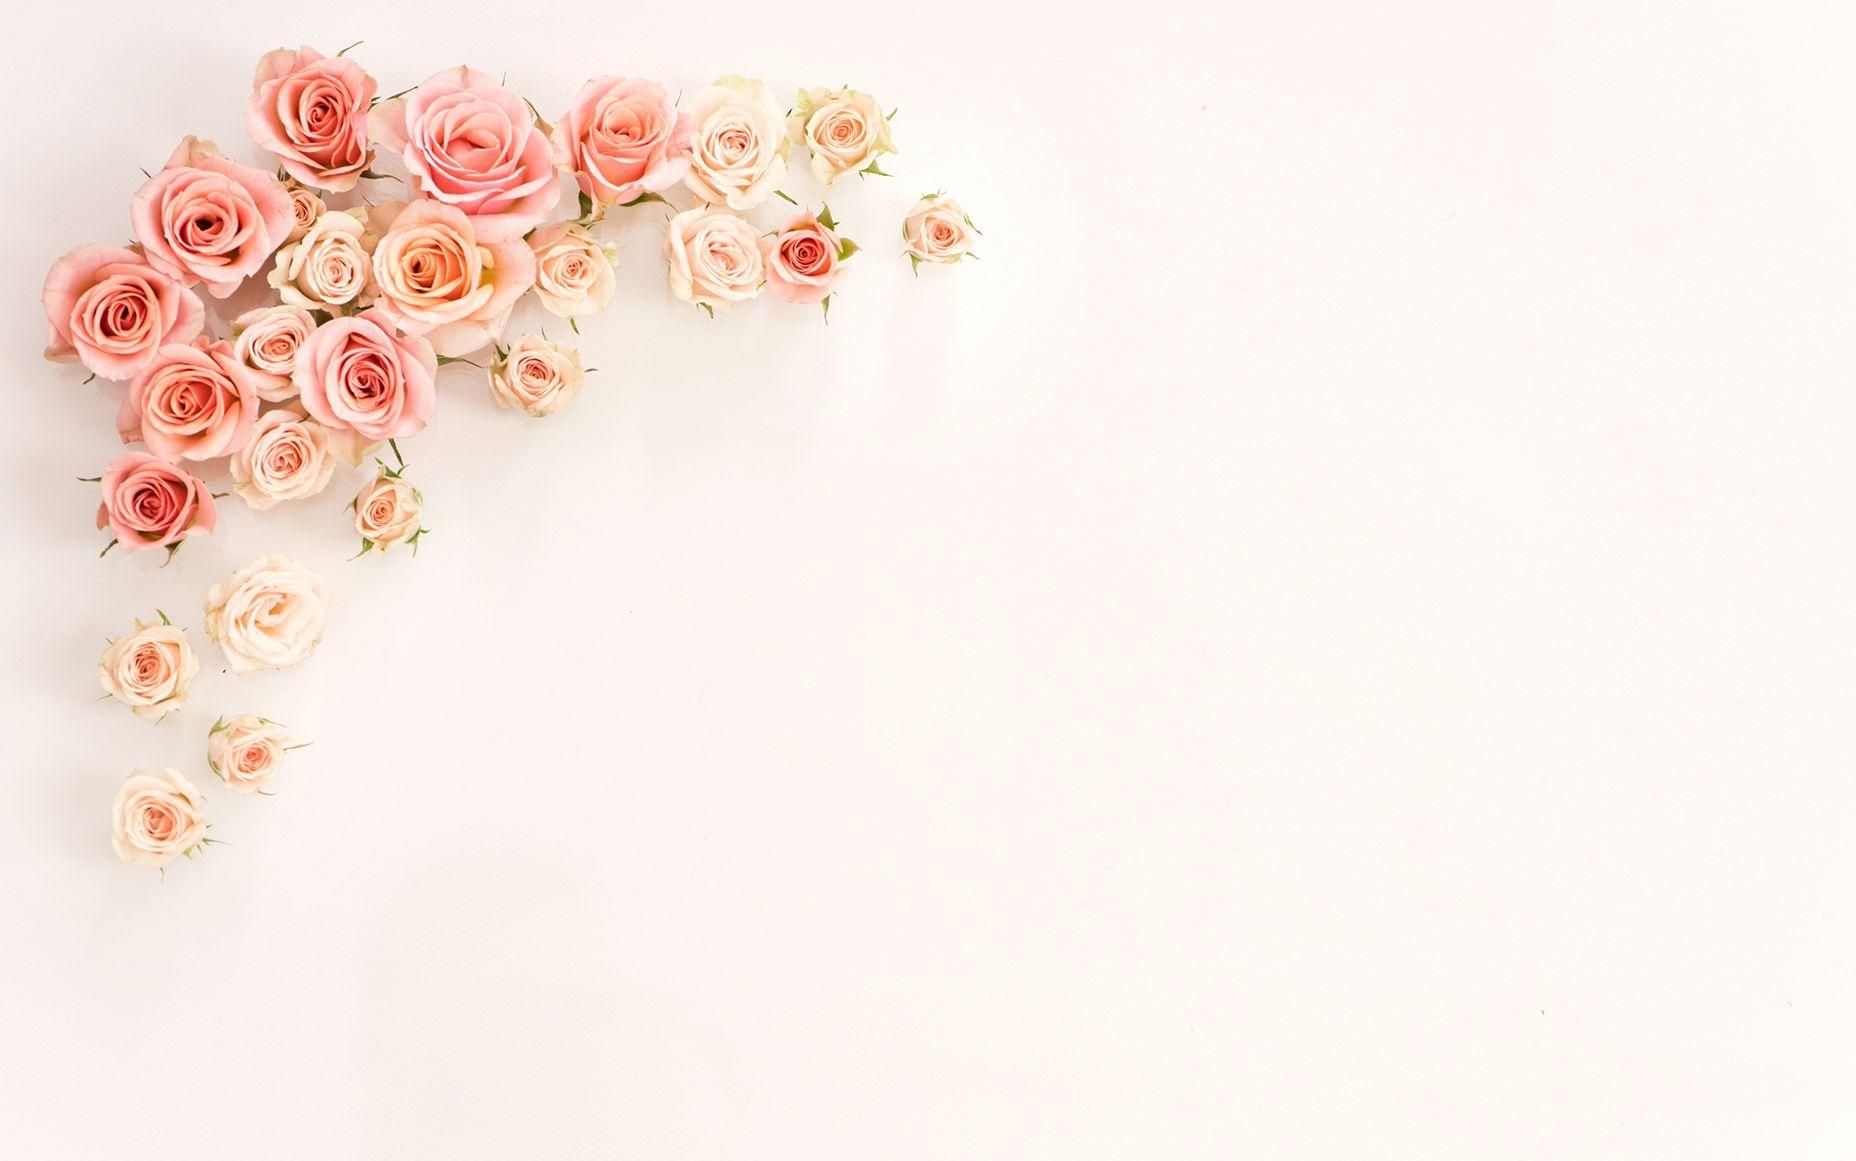 Aesthetic Rose Computer Wallpapers